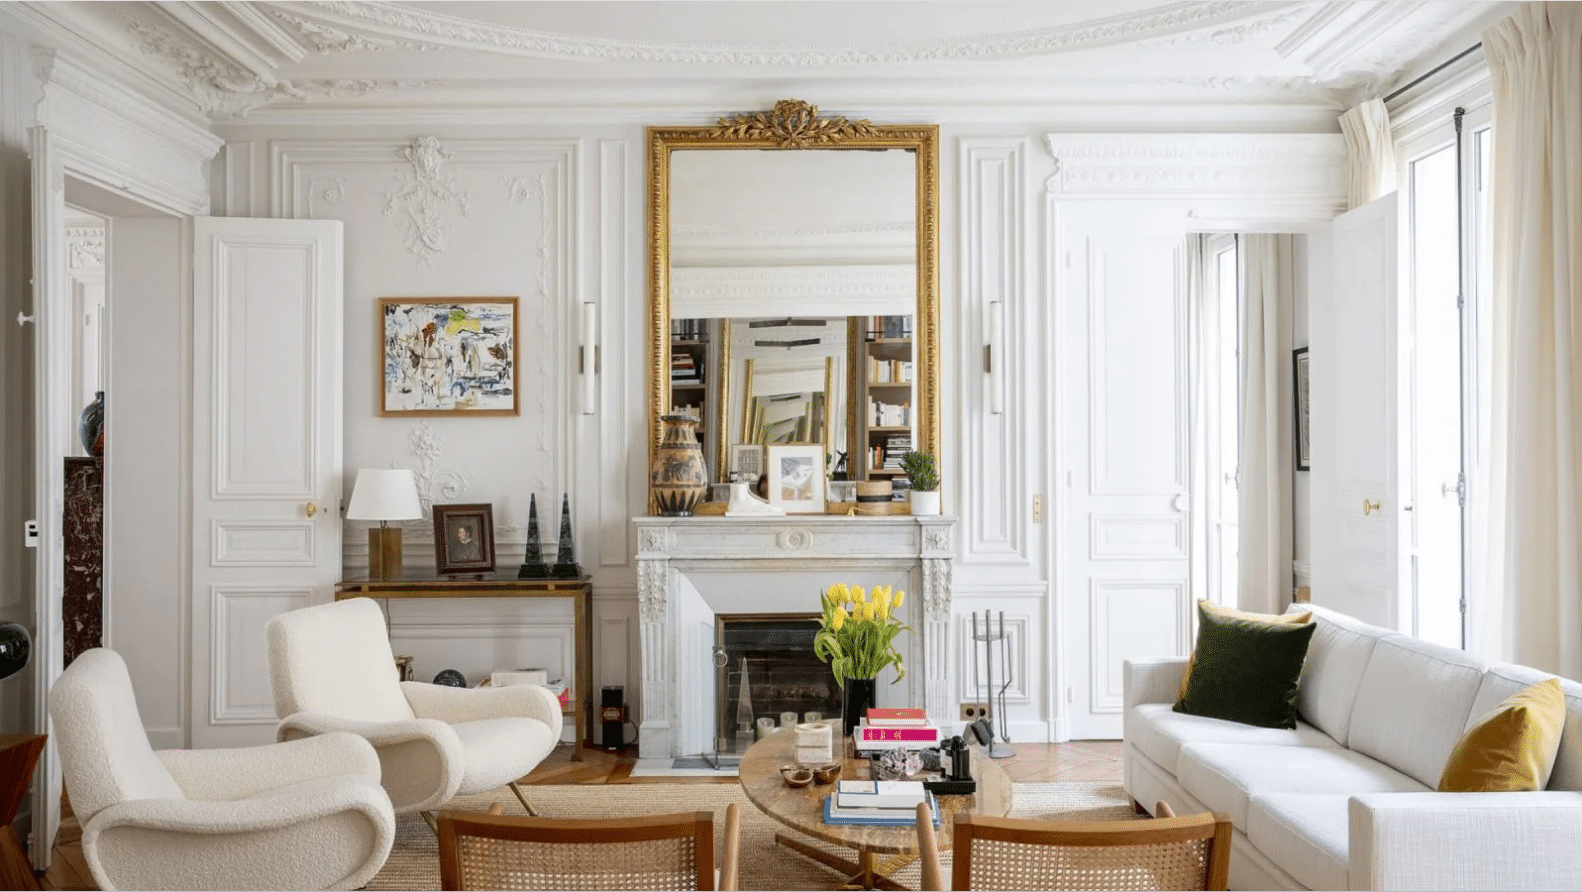 Creating the Perfect Parisian Decor Look for Your Home